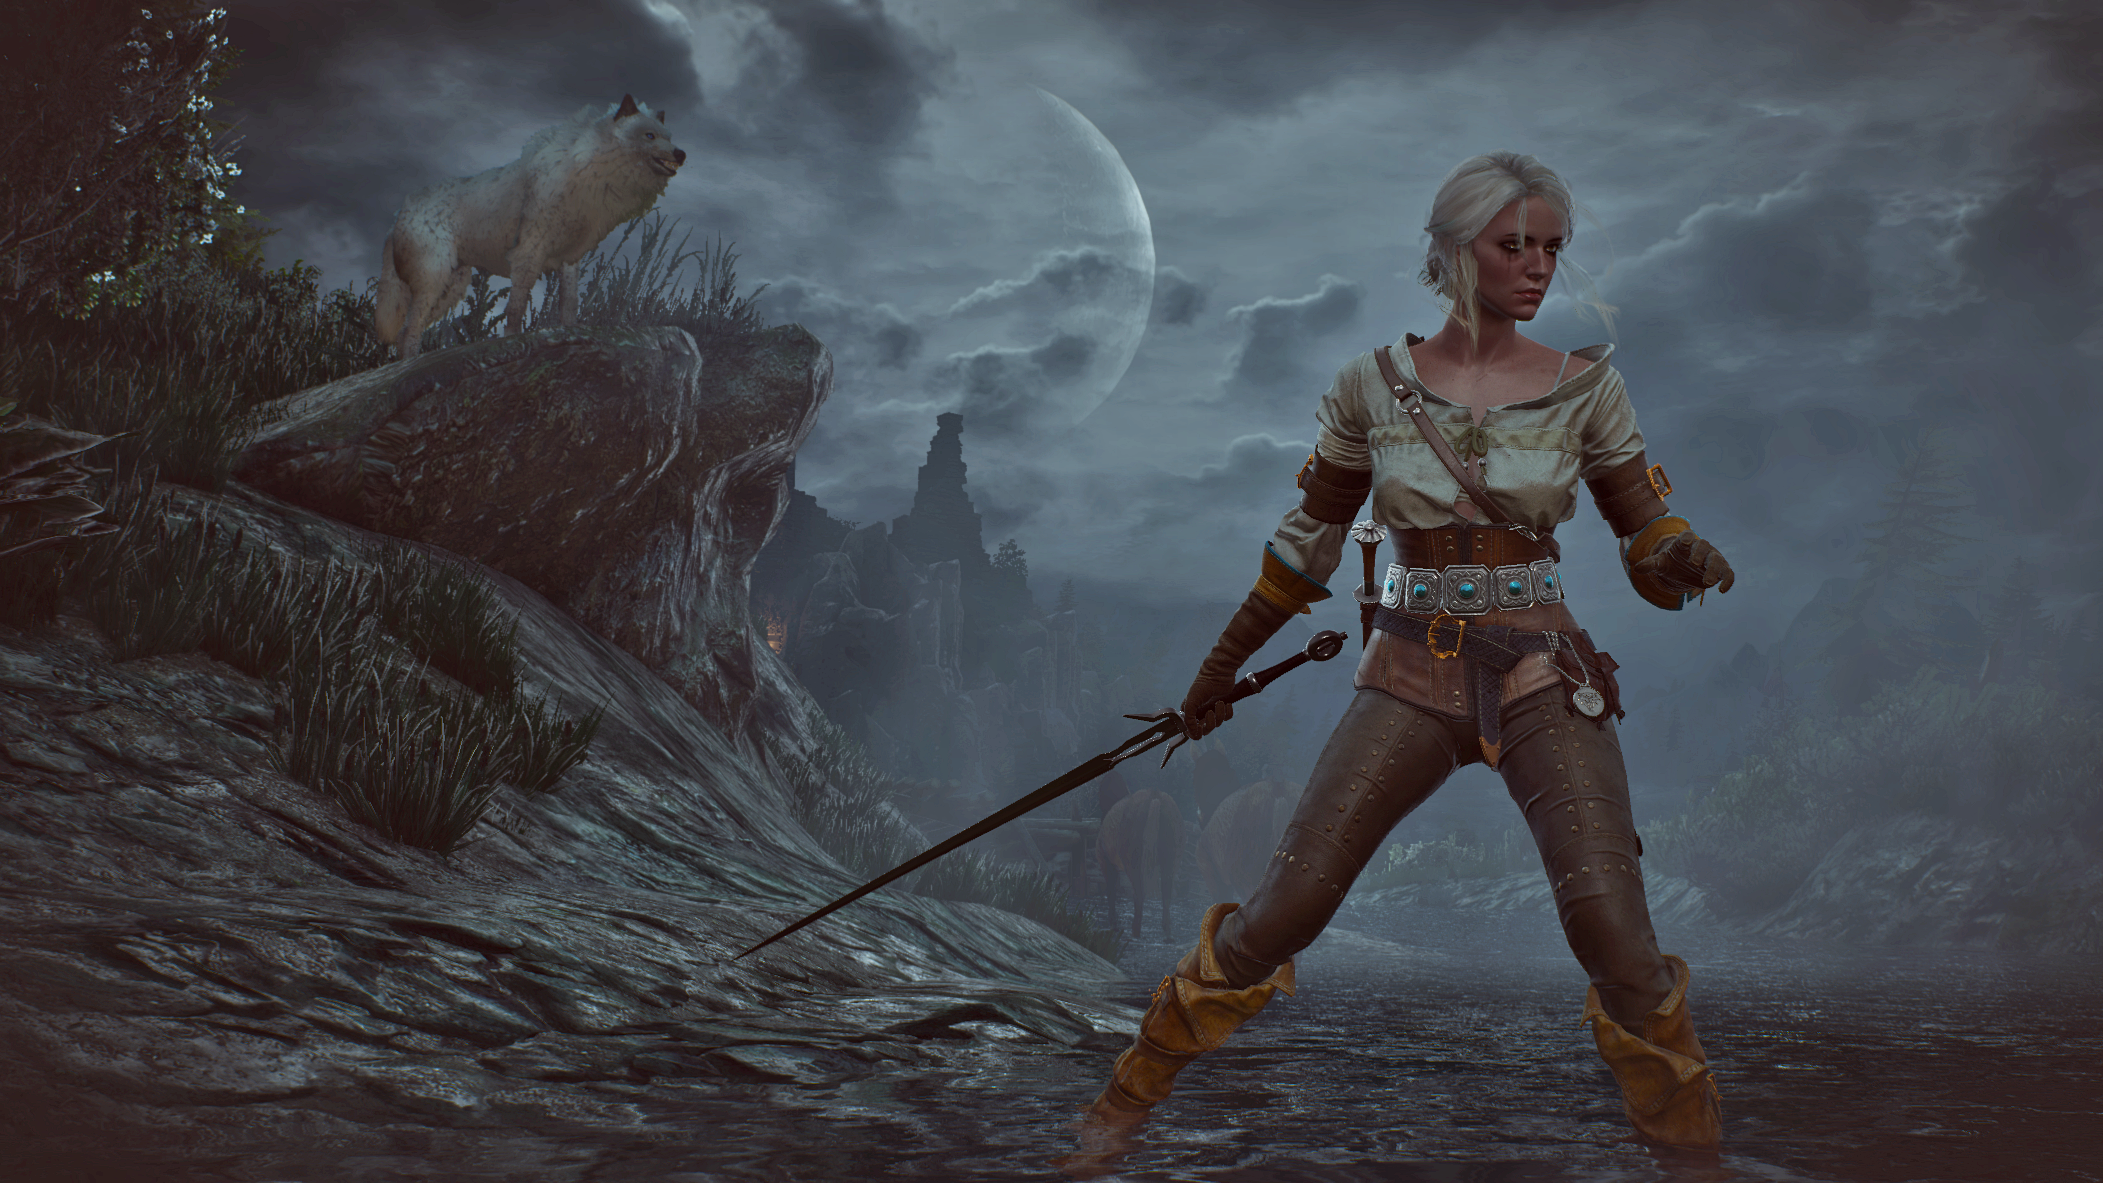 General 2103x1183 The Witcher The Witcher 3: Wild Hunt Cirilla Fiona Elen Riannon video games video game characters